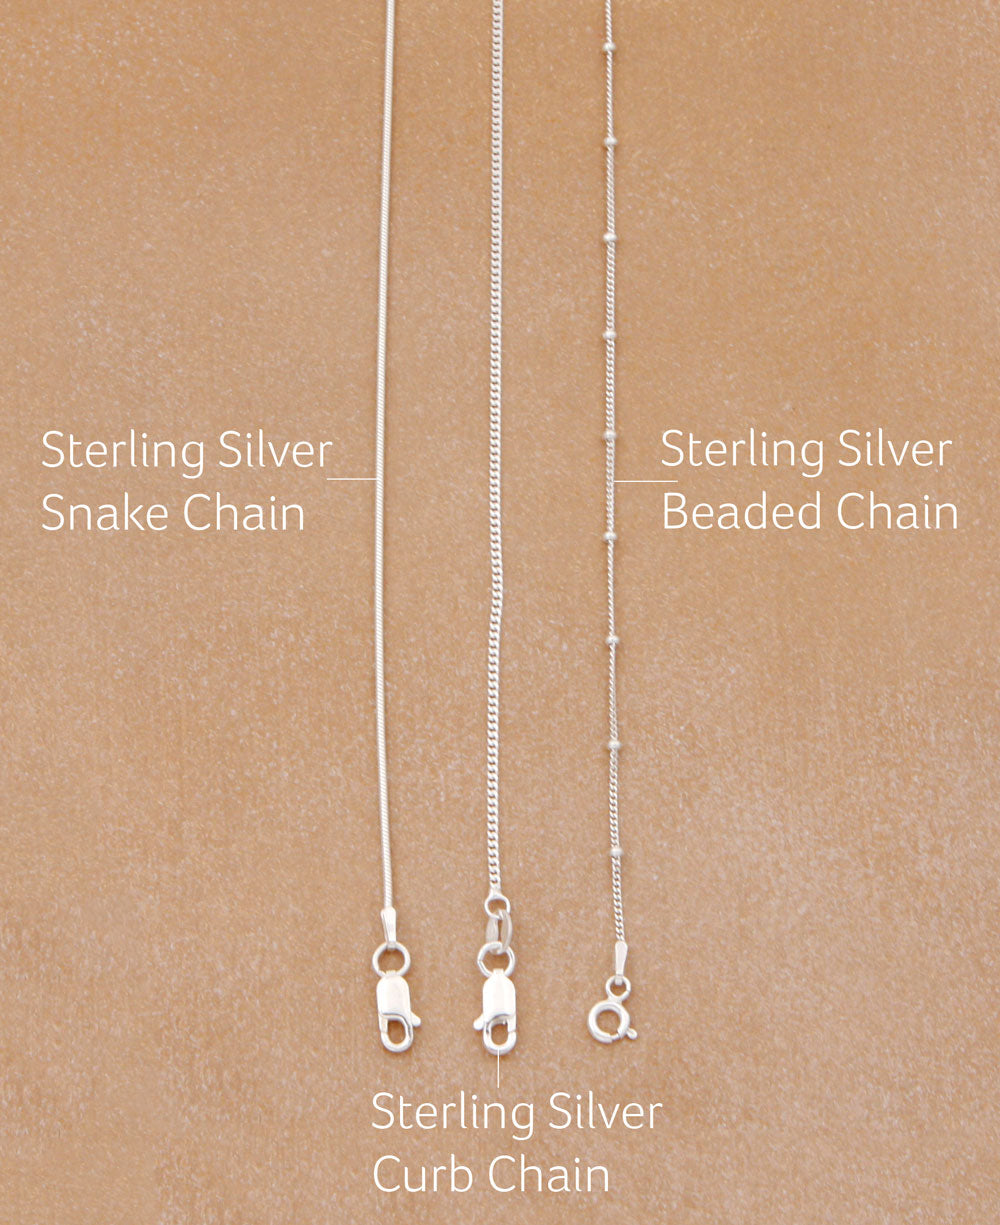 Italian Sterling Silver Chains